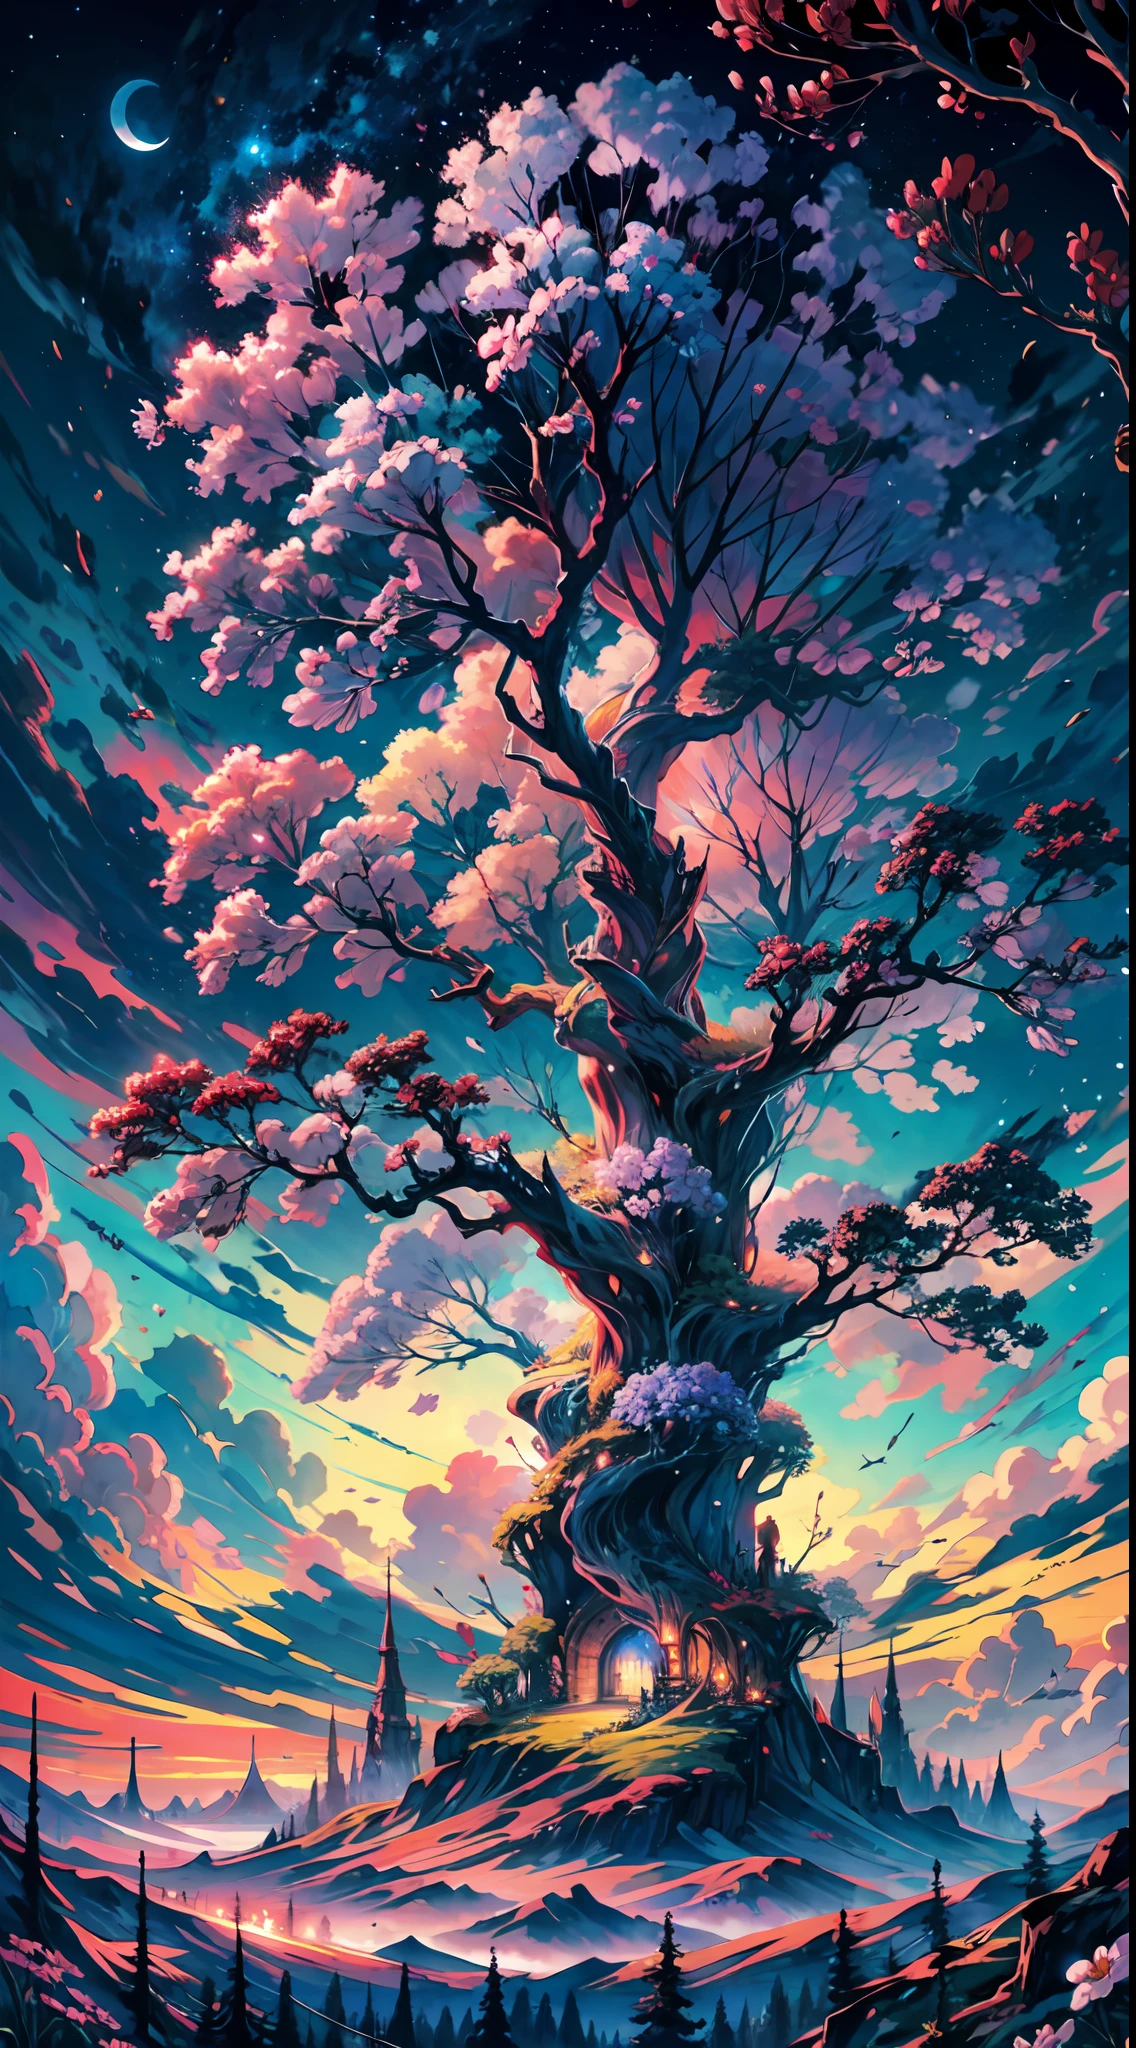 The image portrays a breathtaking, otherworldly landscape, set in a fantasy atmosphere of wonder and magic BREAK ,at the center of the image stands an awe-inspiring world tree, towering high into the clouds and reaching towards the heavens,Its trunk is massive and gnarled, with branches that stretch out in all directions, adorned with leaves and flowers that shimmer with a radiant glow.
BREAK 
The surrounding environment is equally captivating, with rolling hills and lush forests that extend as far as the eye can see. The sky is a vibrant blend of purples, pinks, and blues, with wispy clouds that seem to dance around the tree's branches and leaves
BREAK 
The colors used in the image are rich and vibrant, with a dazzling array of hues that create a sense of depth and dimension. The details of the tree and its surroundings are intricate and finely crafted, capturing the essence of a truly mystical and magical world